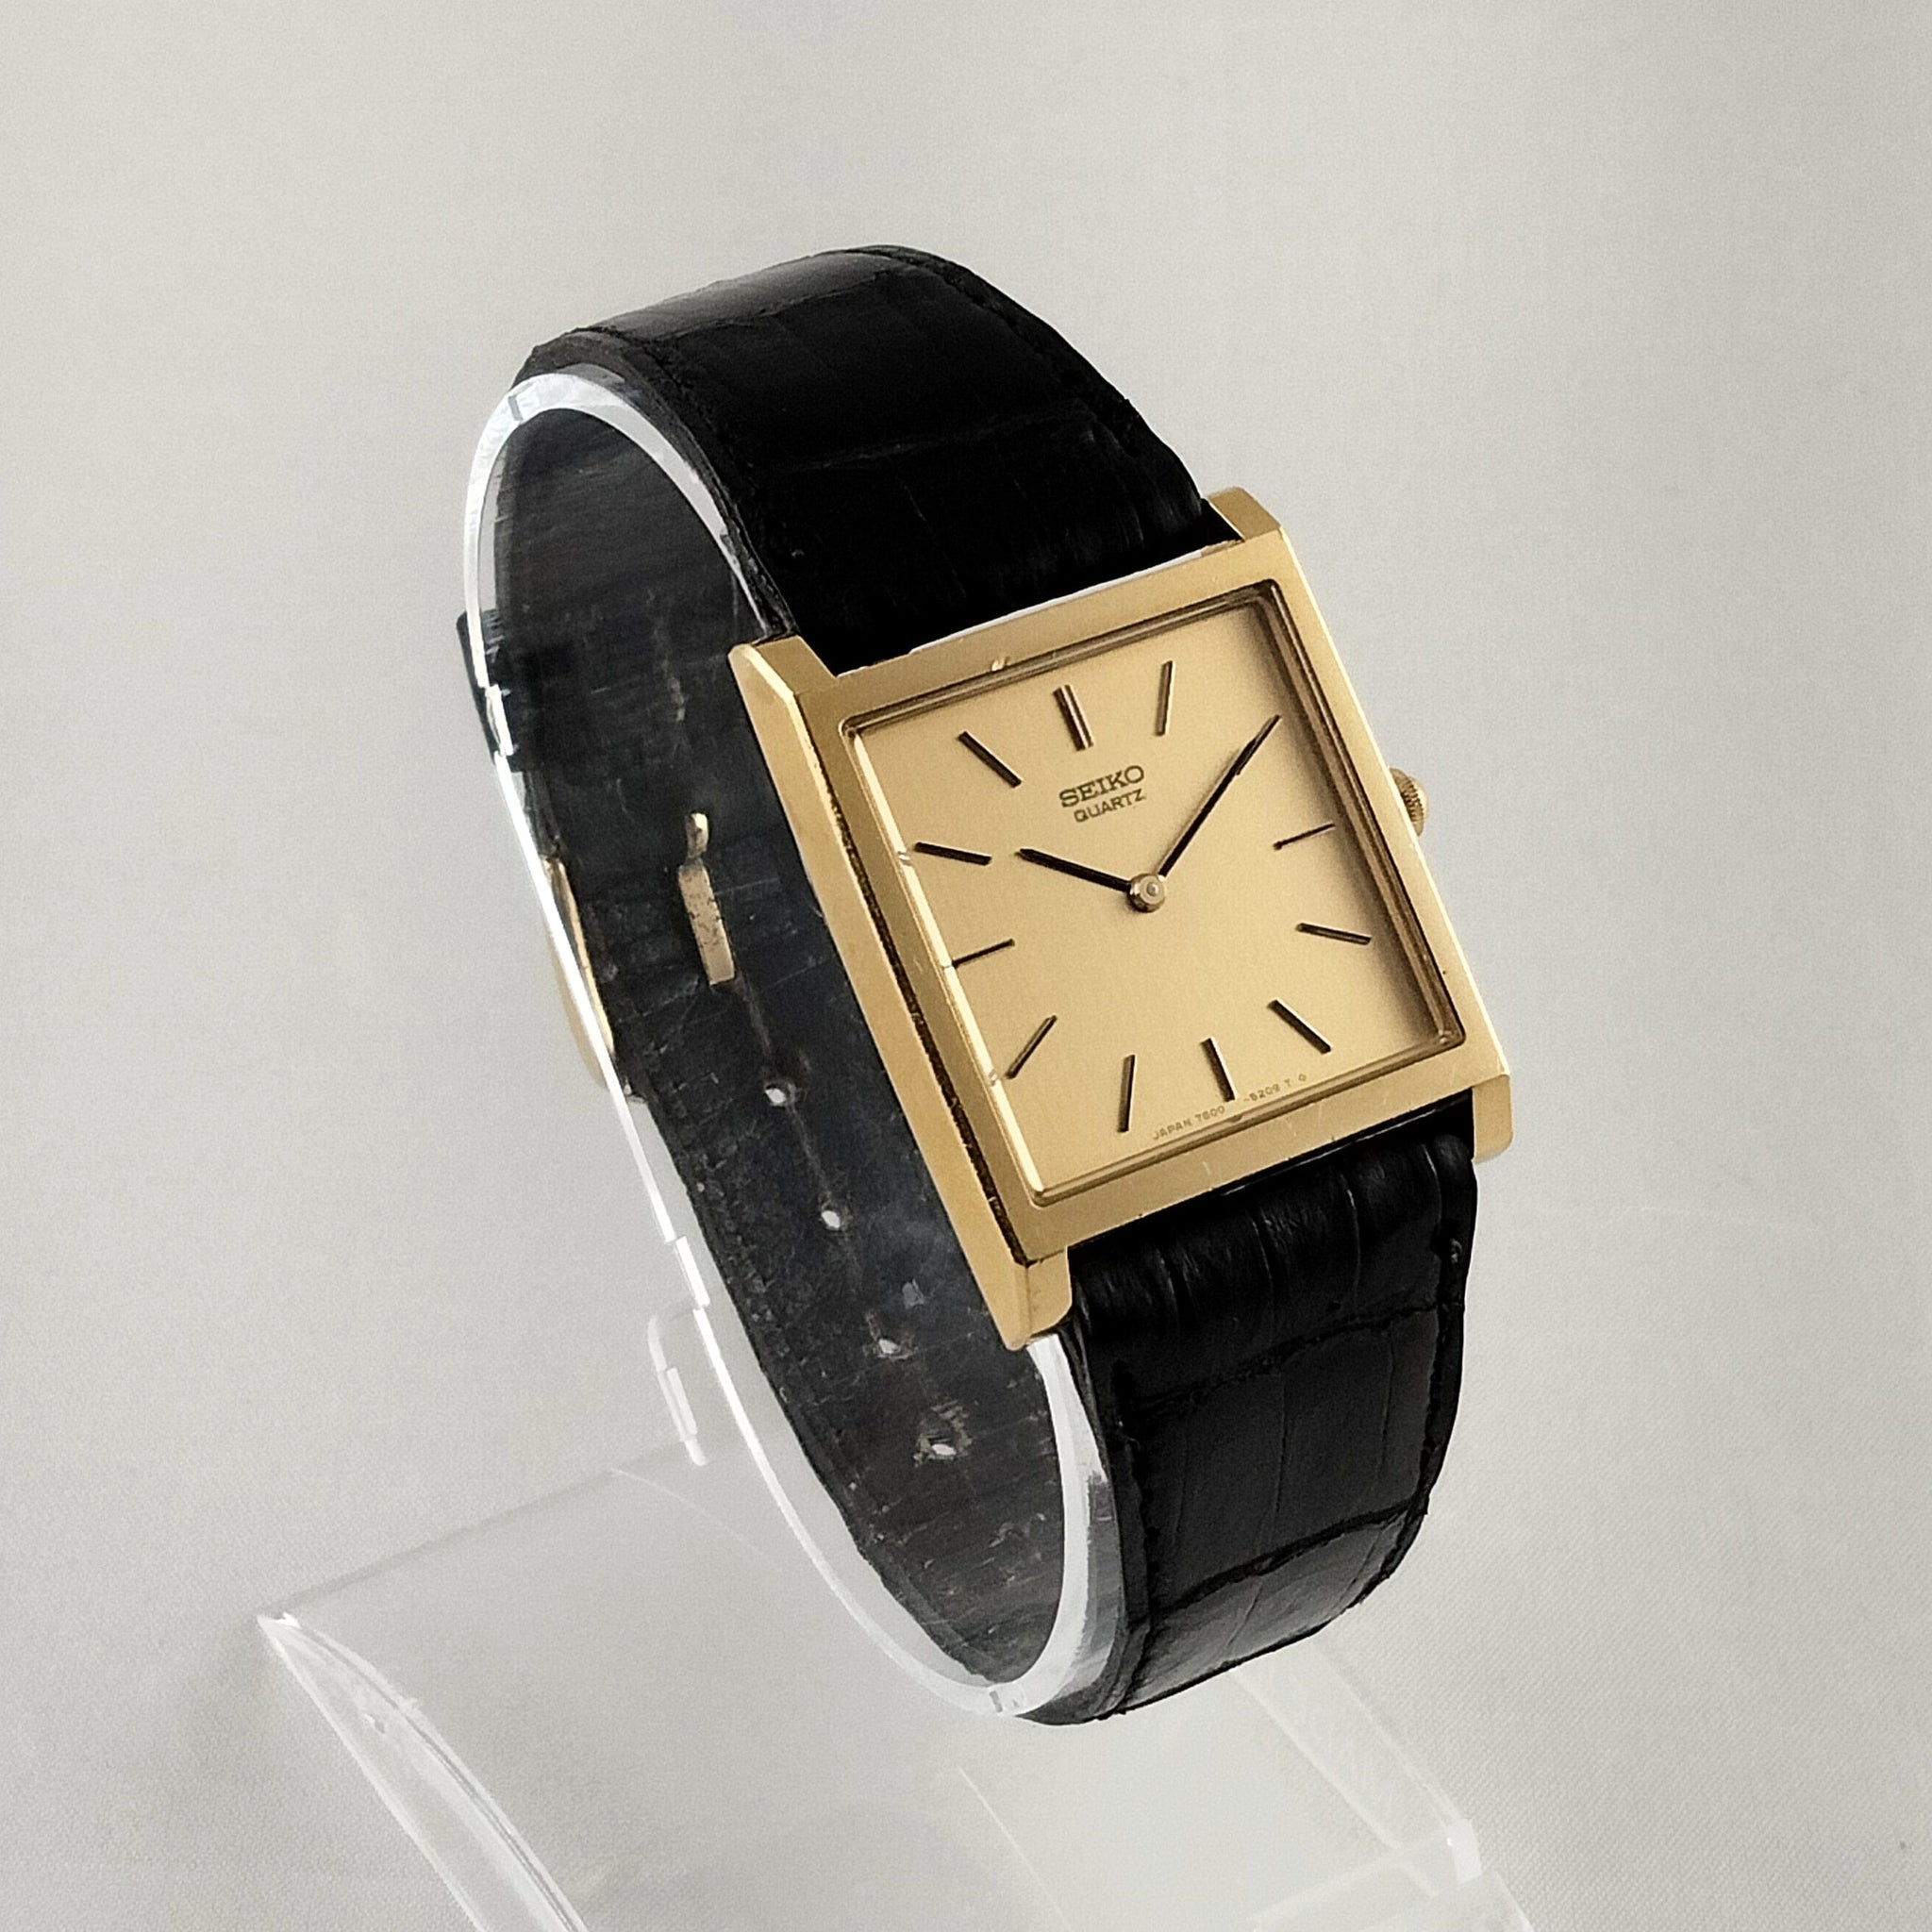 https://www.mikesmcm.com/cdn/shop/files/i-like-mikes-mid-century-modern-watches-seiko-unisex-watch-gold-tone-square-dial-genuine-black-leather-strap-42015052923175_2048x.jpg?v=1690401785